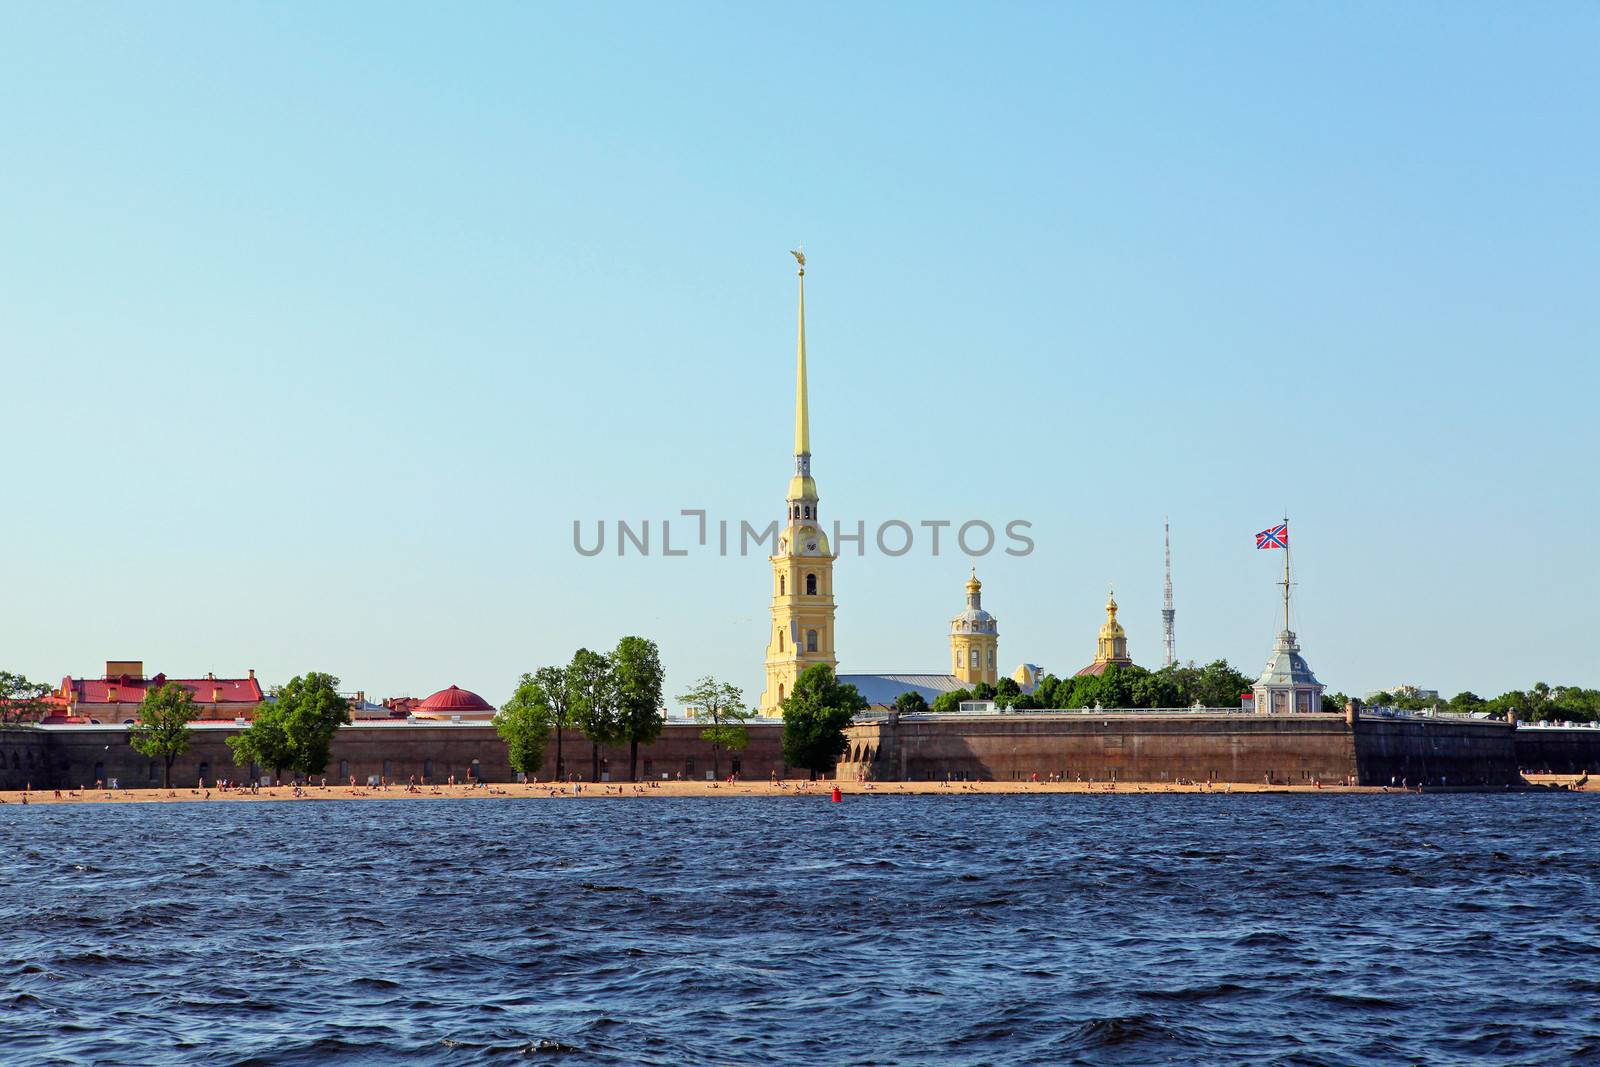 Landscape of Peter and Paul Fortress in Saint Petersburg